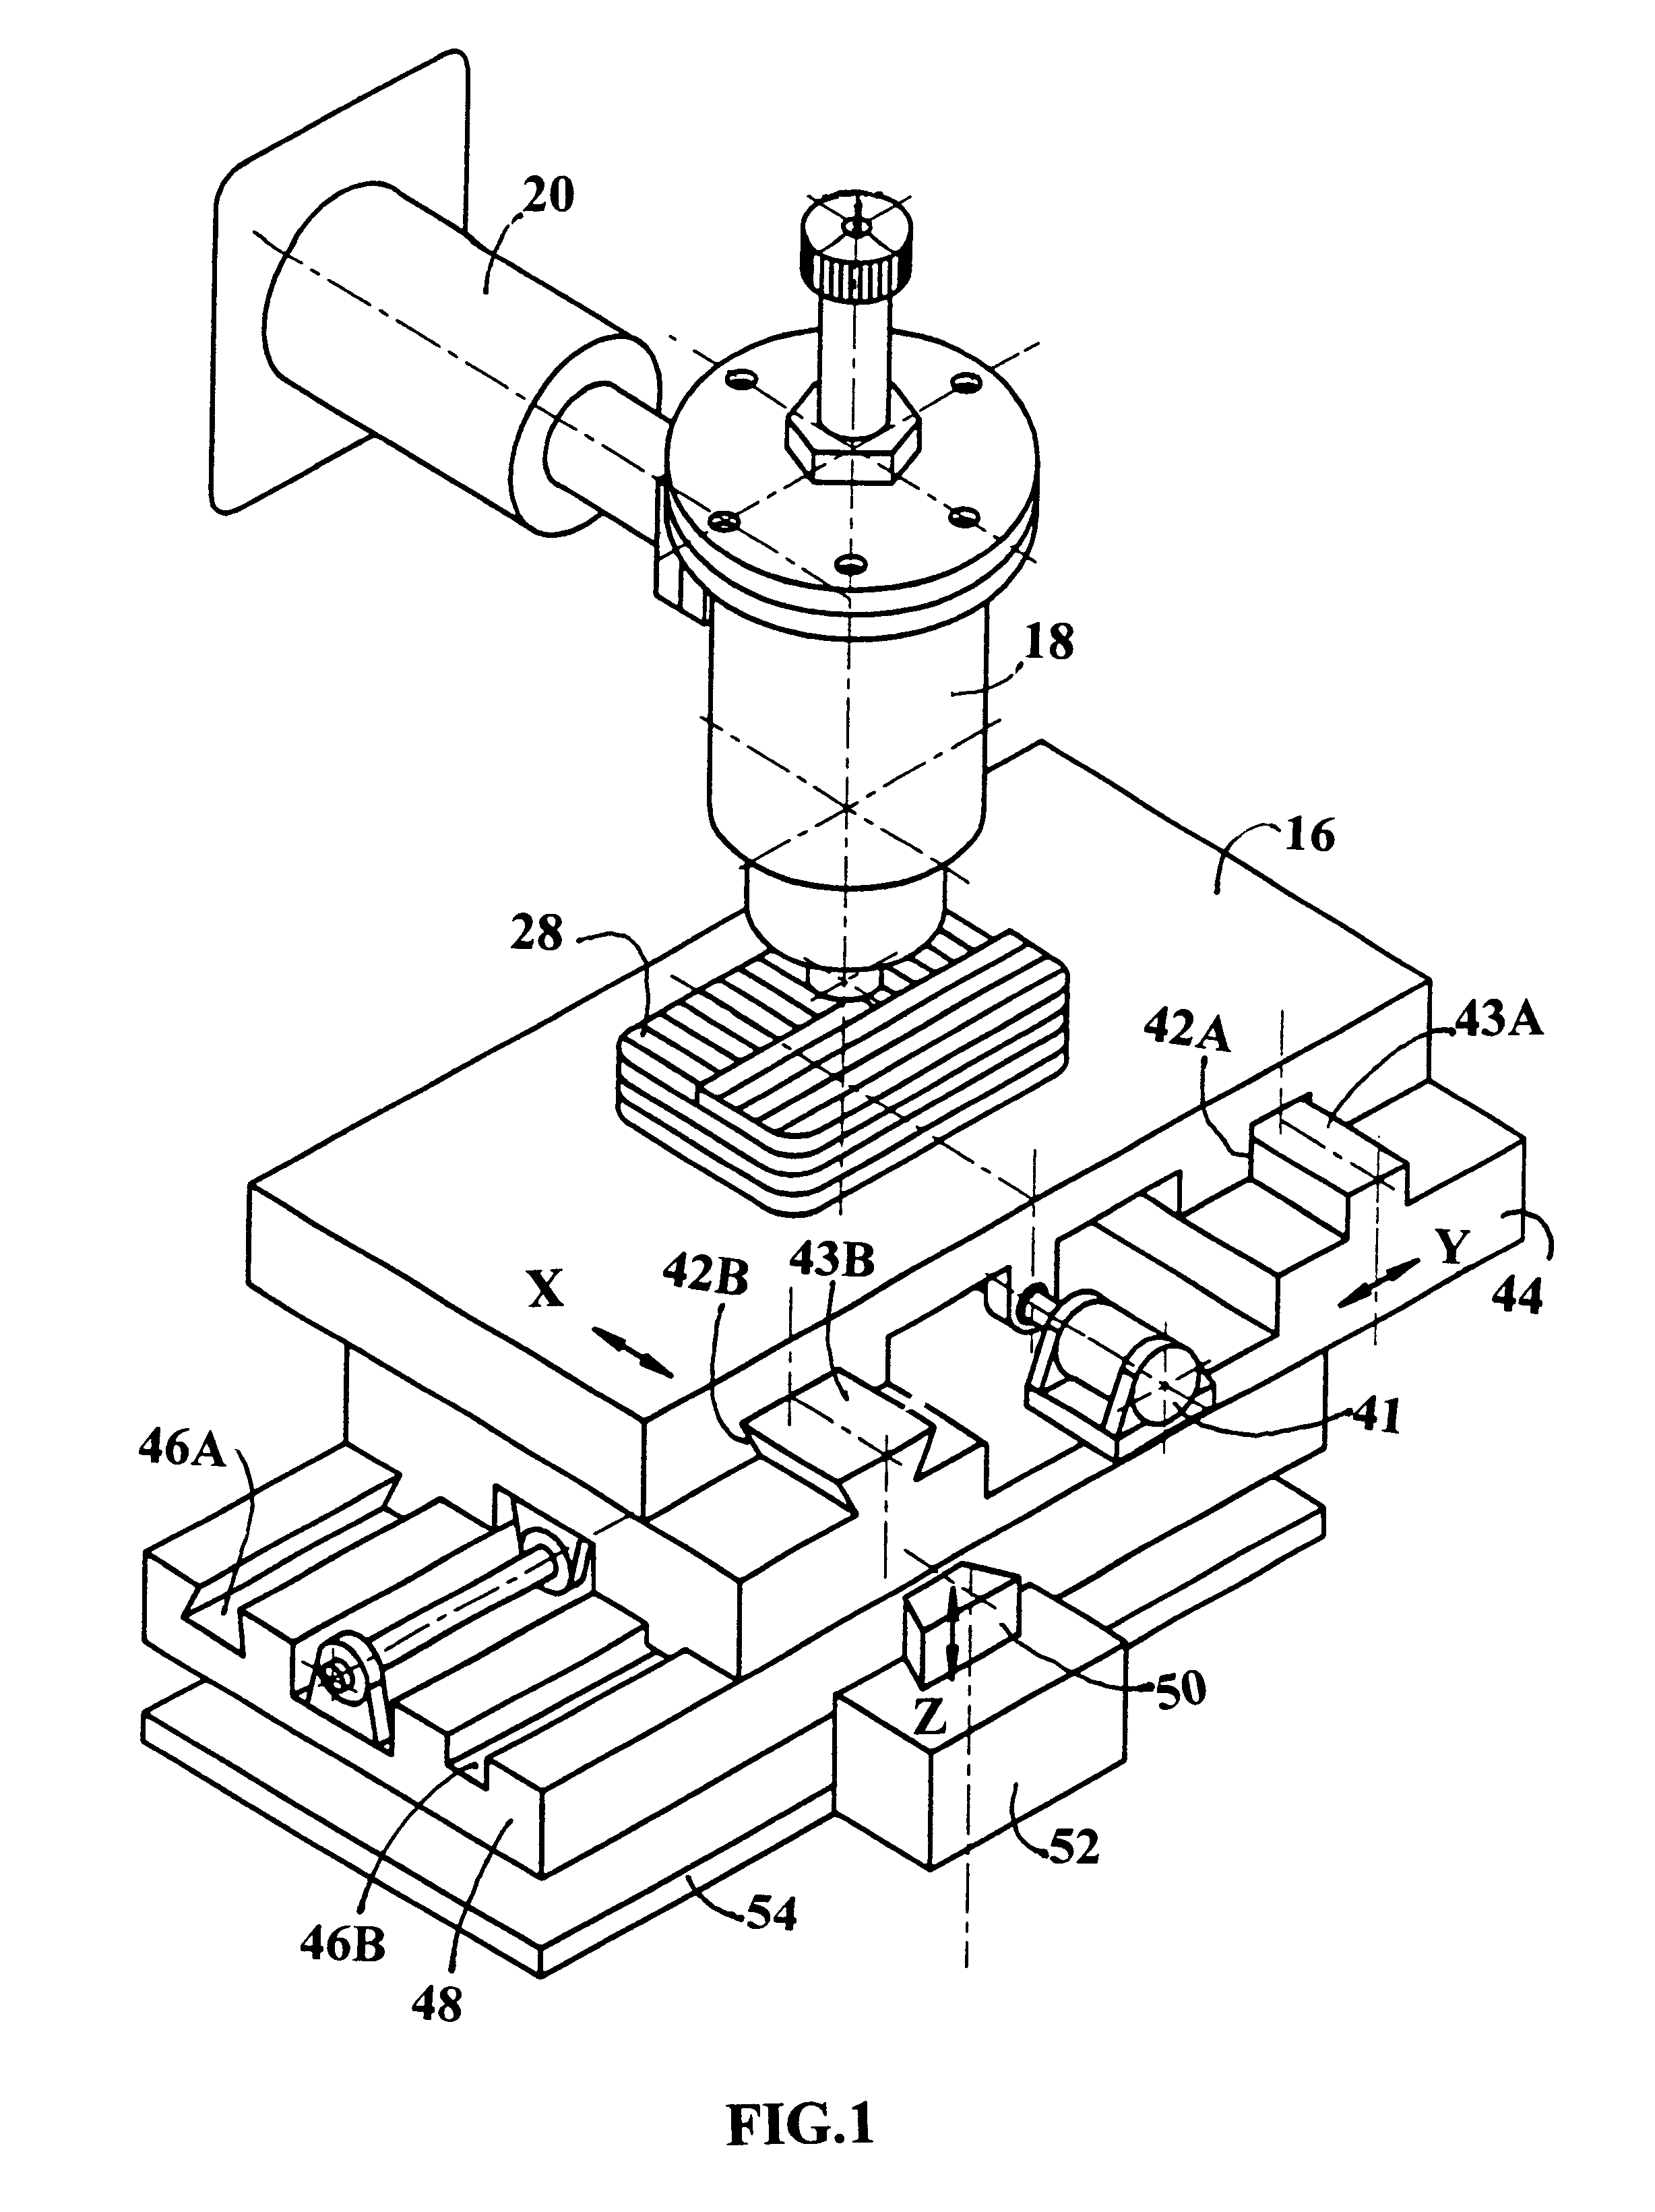 Method for rapidly making a 3-D food object